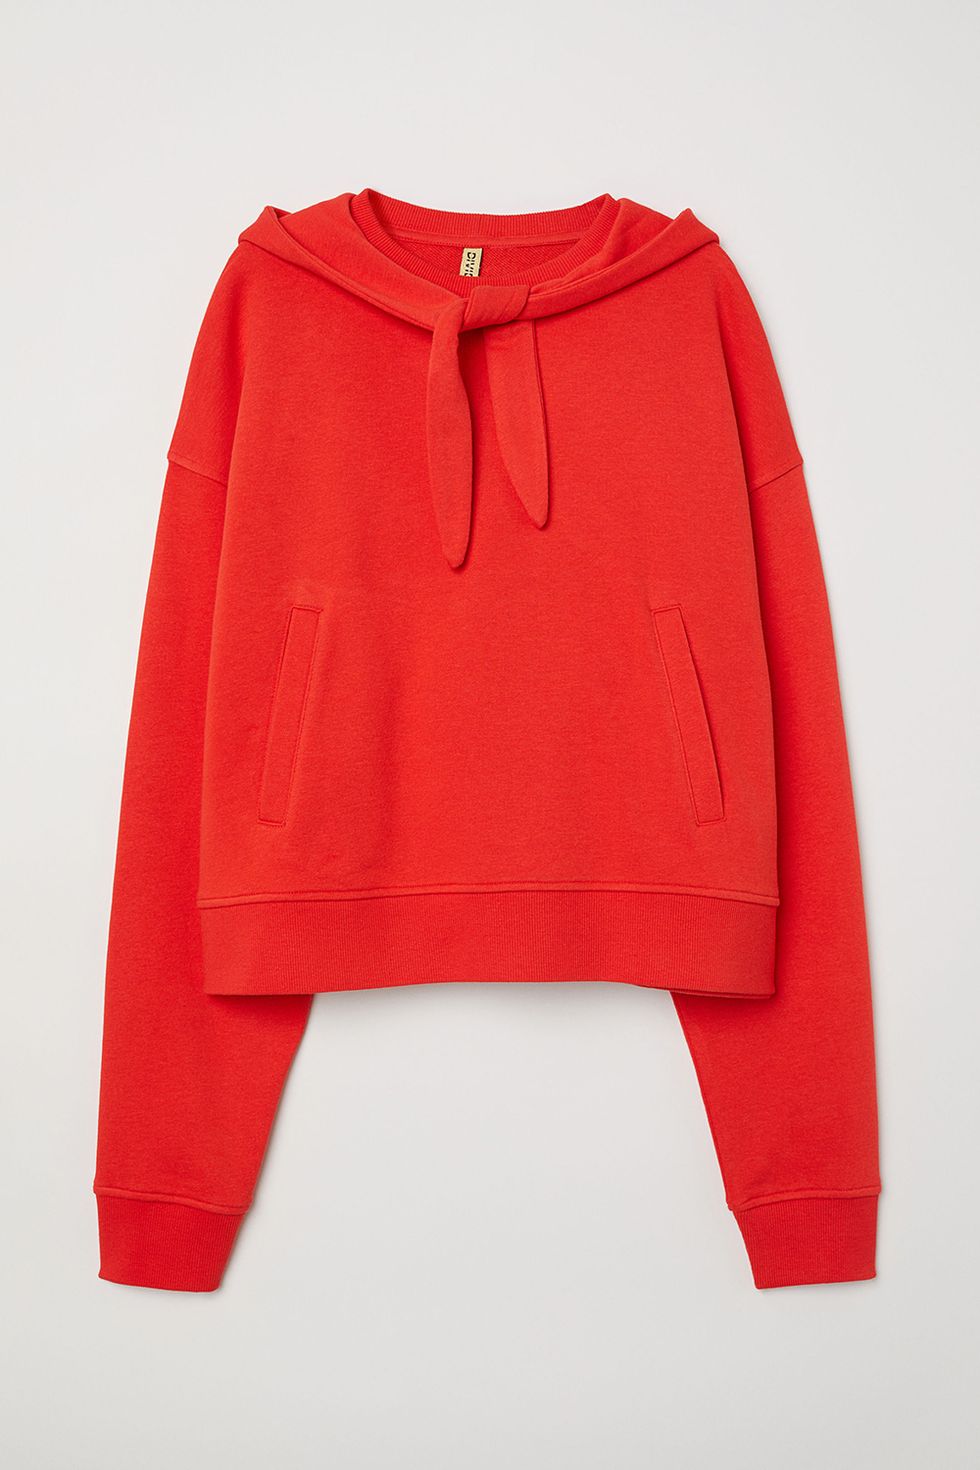 Clothing, Red, Sleeve, Outerwear, Hood, 